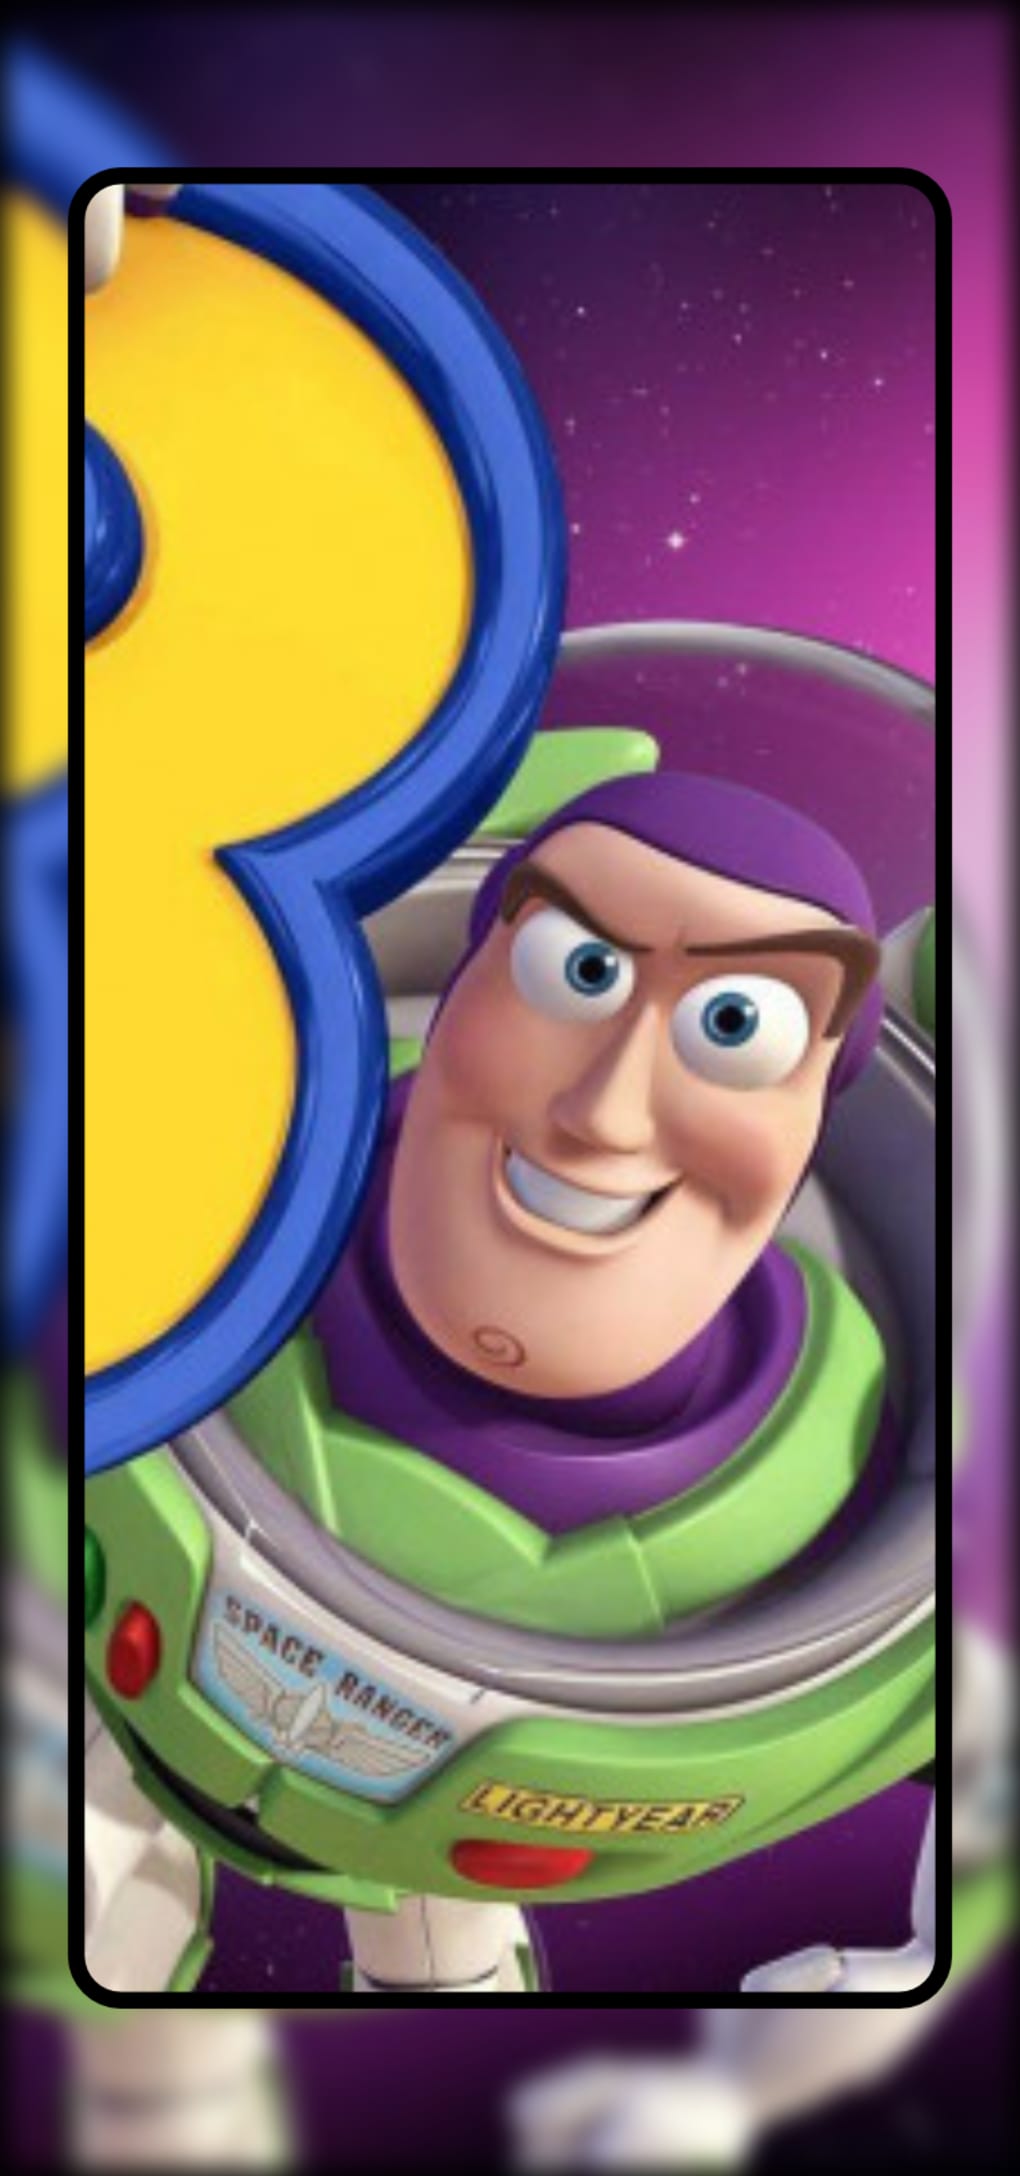 Complete Your Mission With These Mobile And Video Call Wallpapers Inspired  By Disney And Pixars Lightyear  Disney Philippines